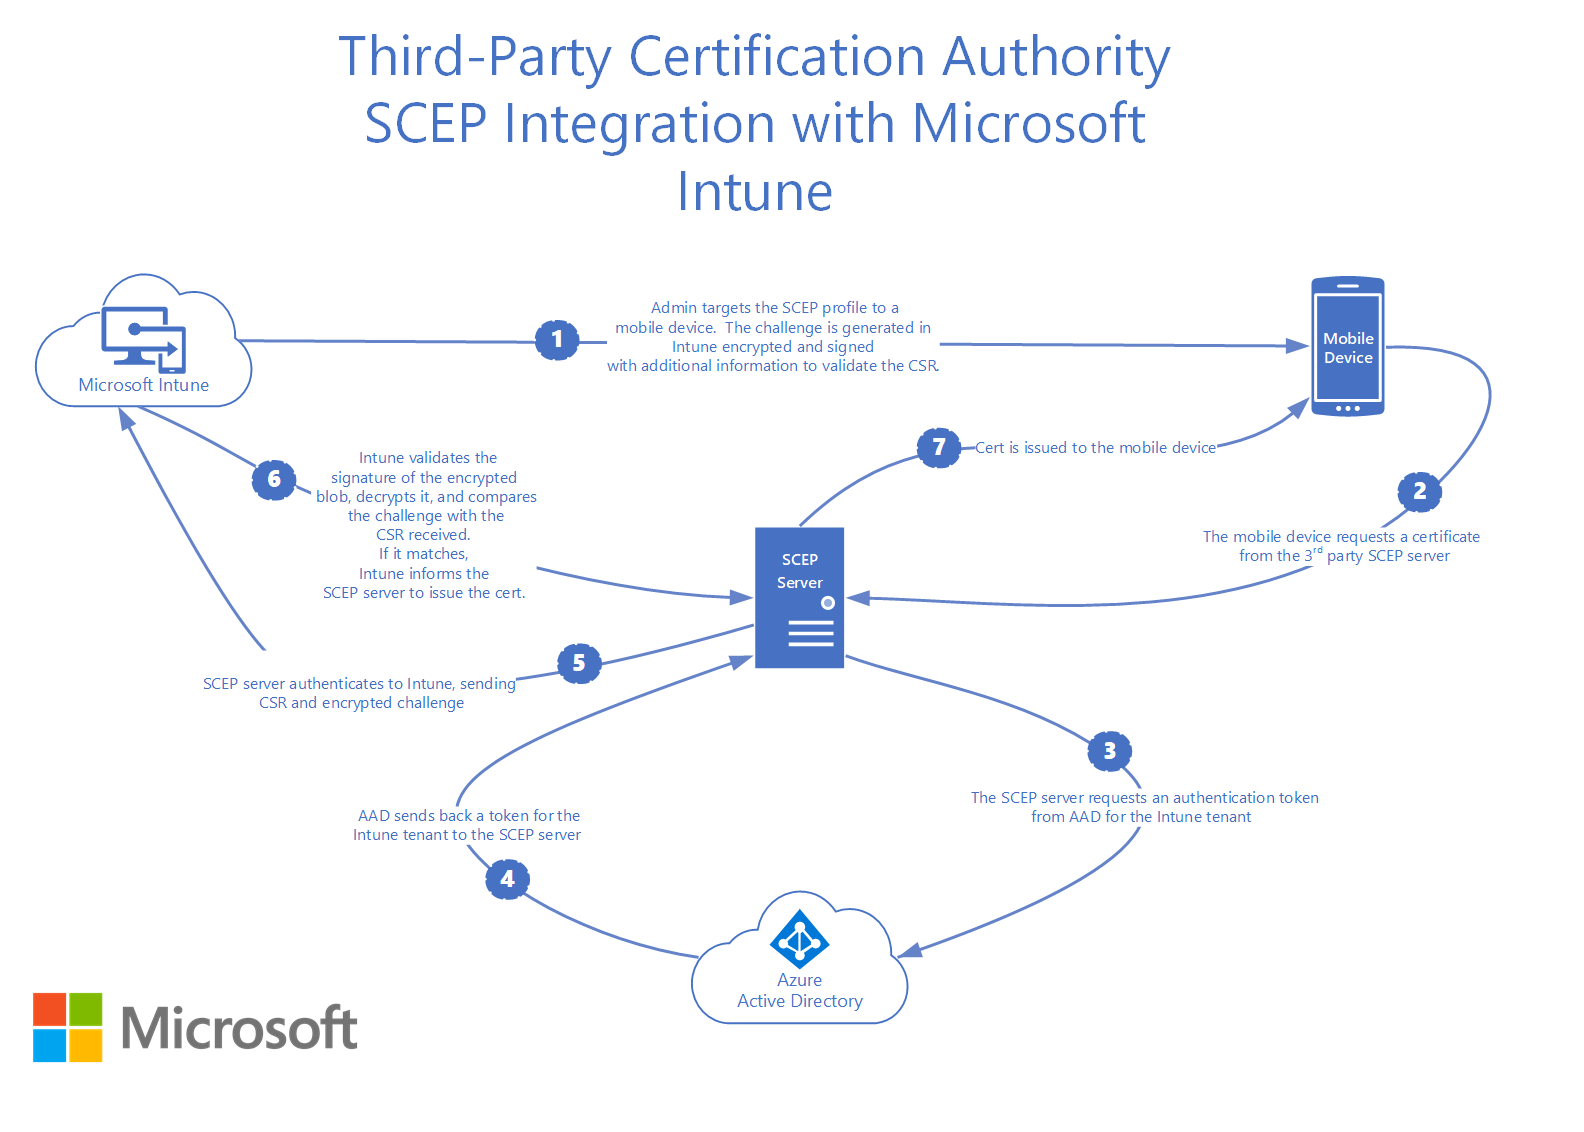 APIs to onboard 3rd party certificate authorities - Microsoft Intune | Microsoft Docs